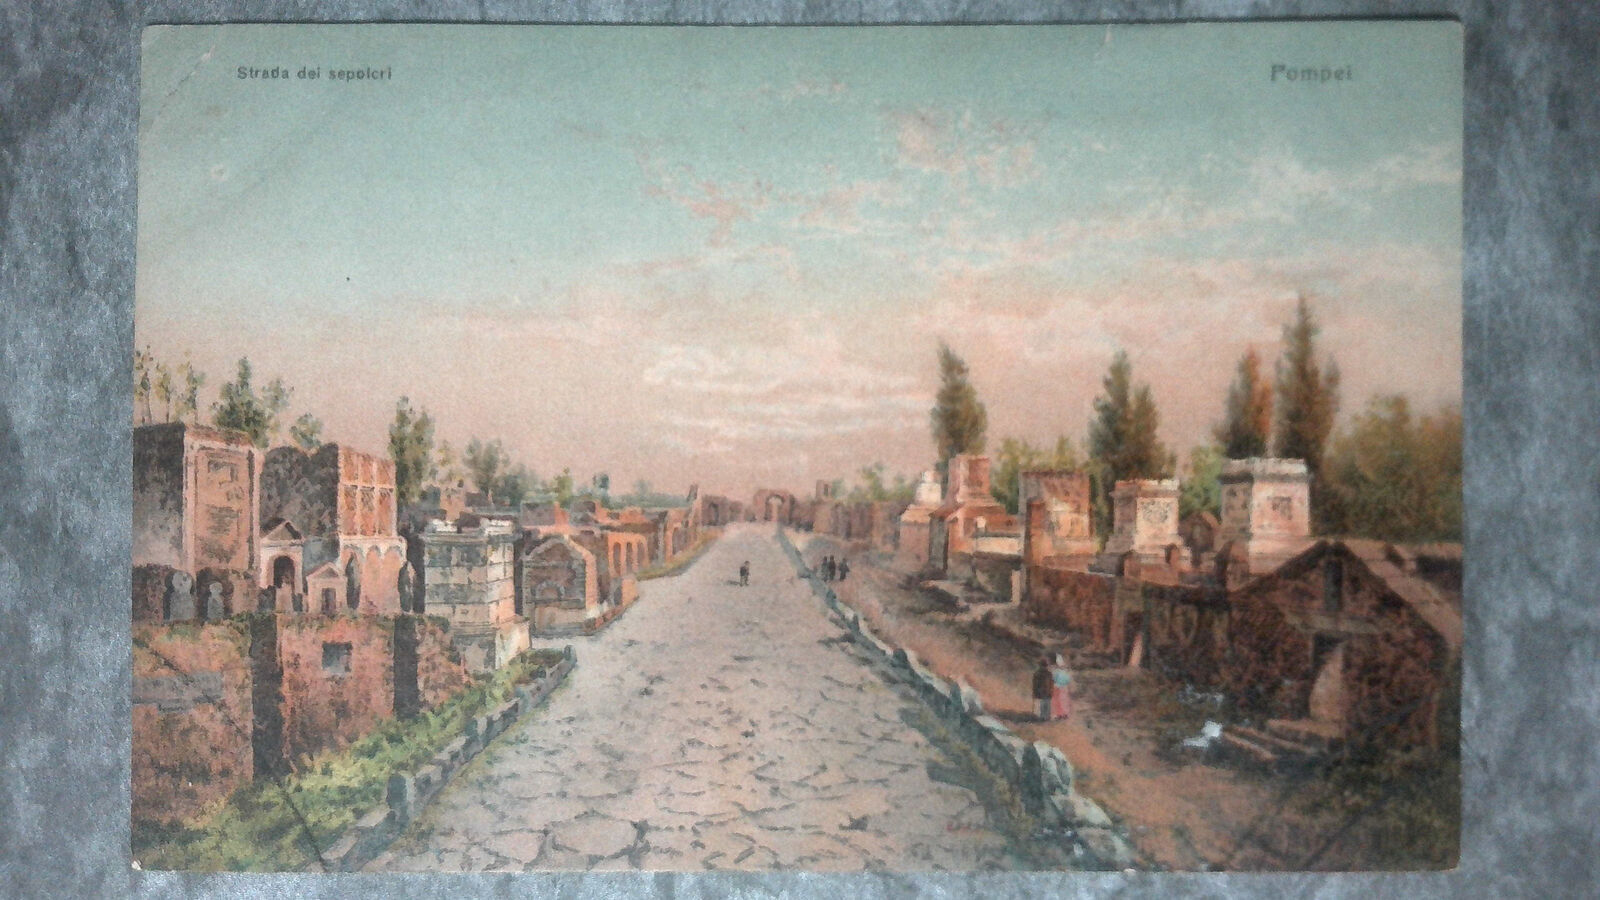 VTG c1919 Tinted Collotype Postcard Road of the Sepulchers Tombs Pompeii Italy